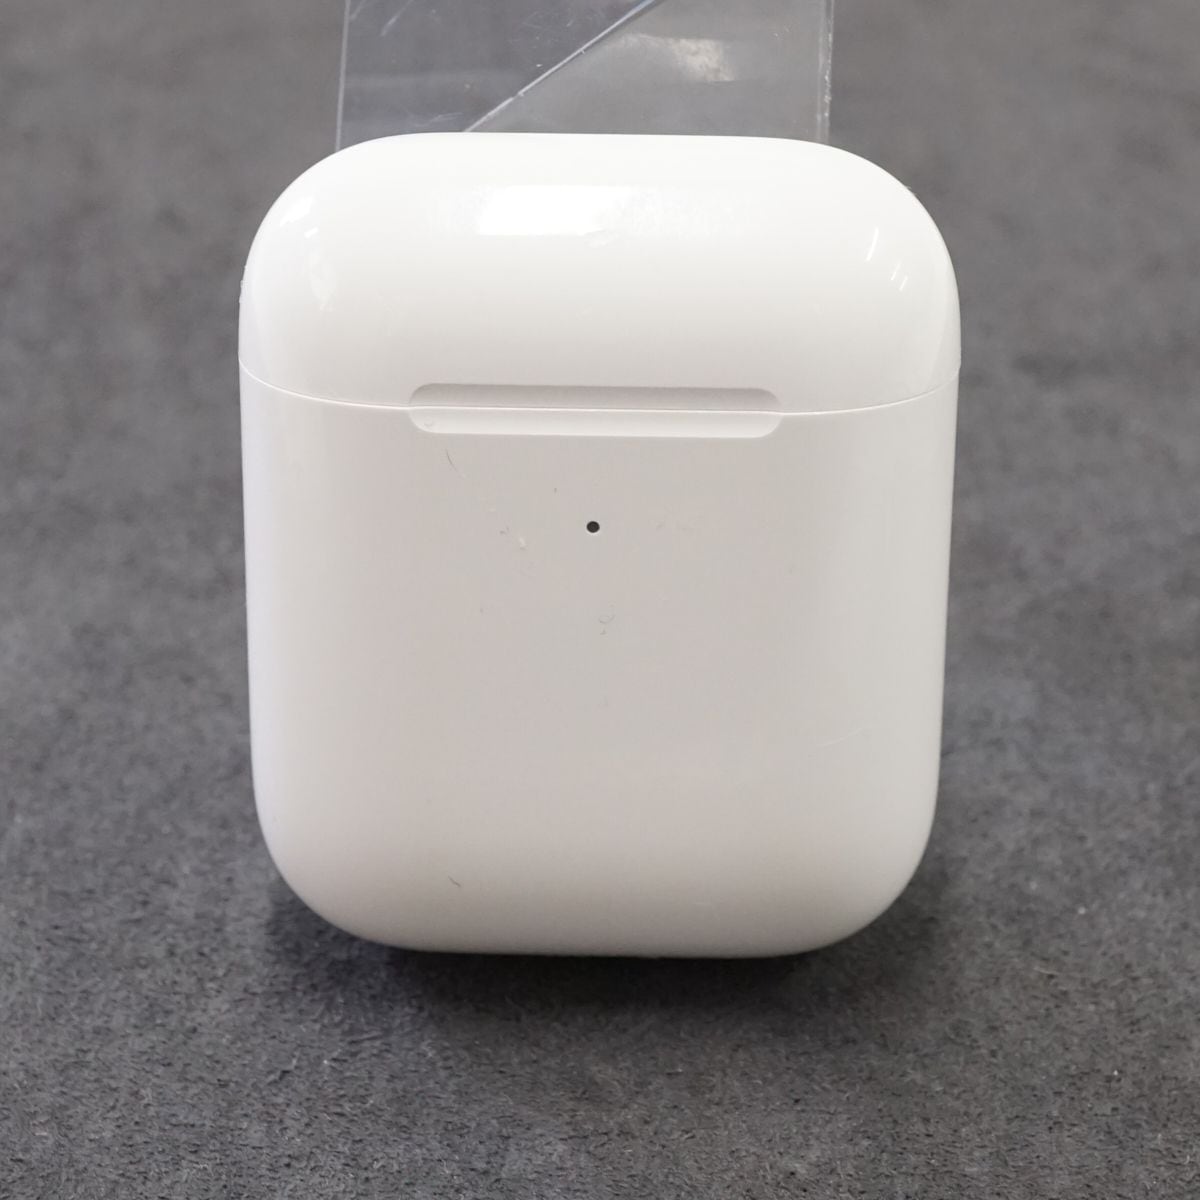 Apple AirPods with Wireless Charging Case エアーポッズ 充電ケース